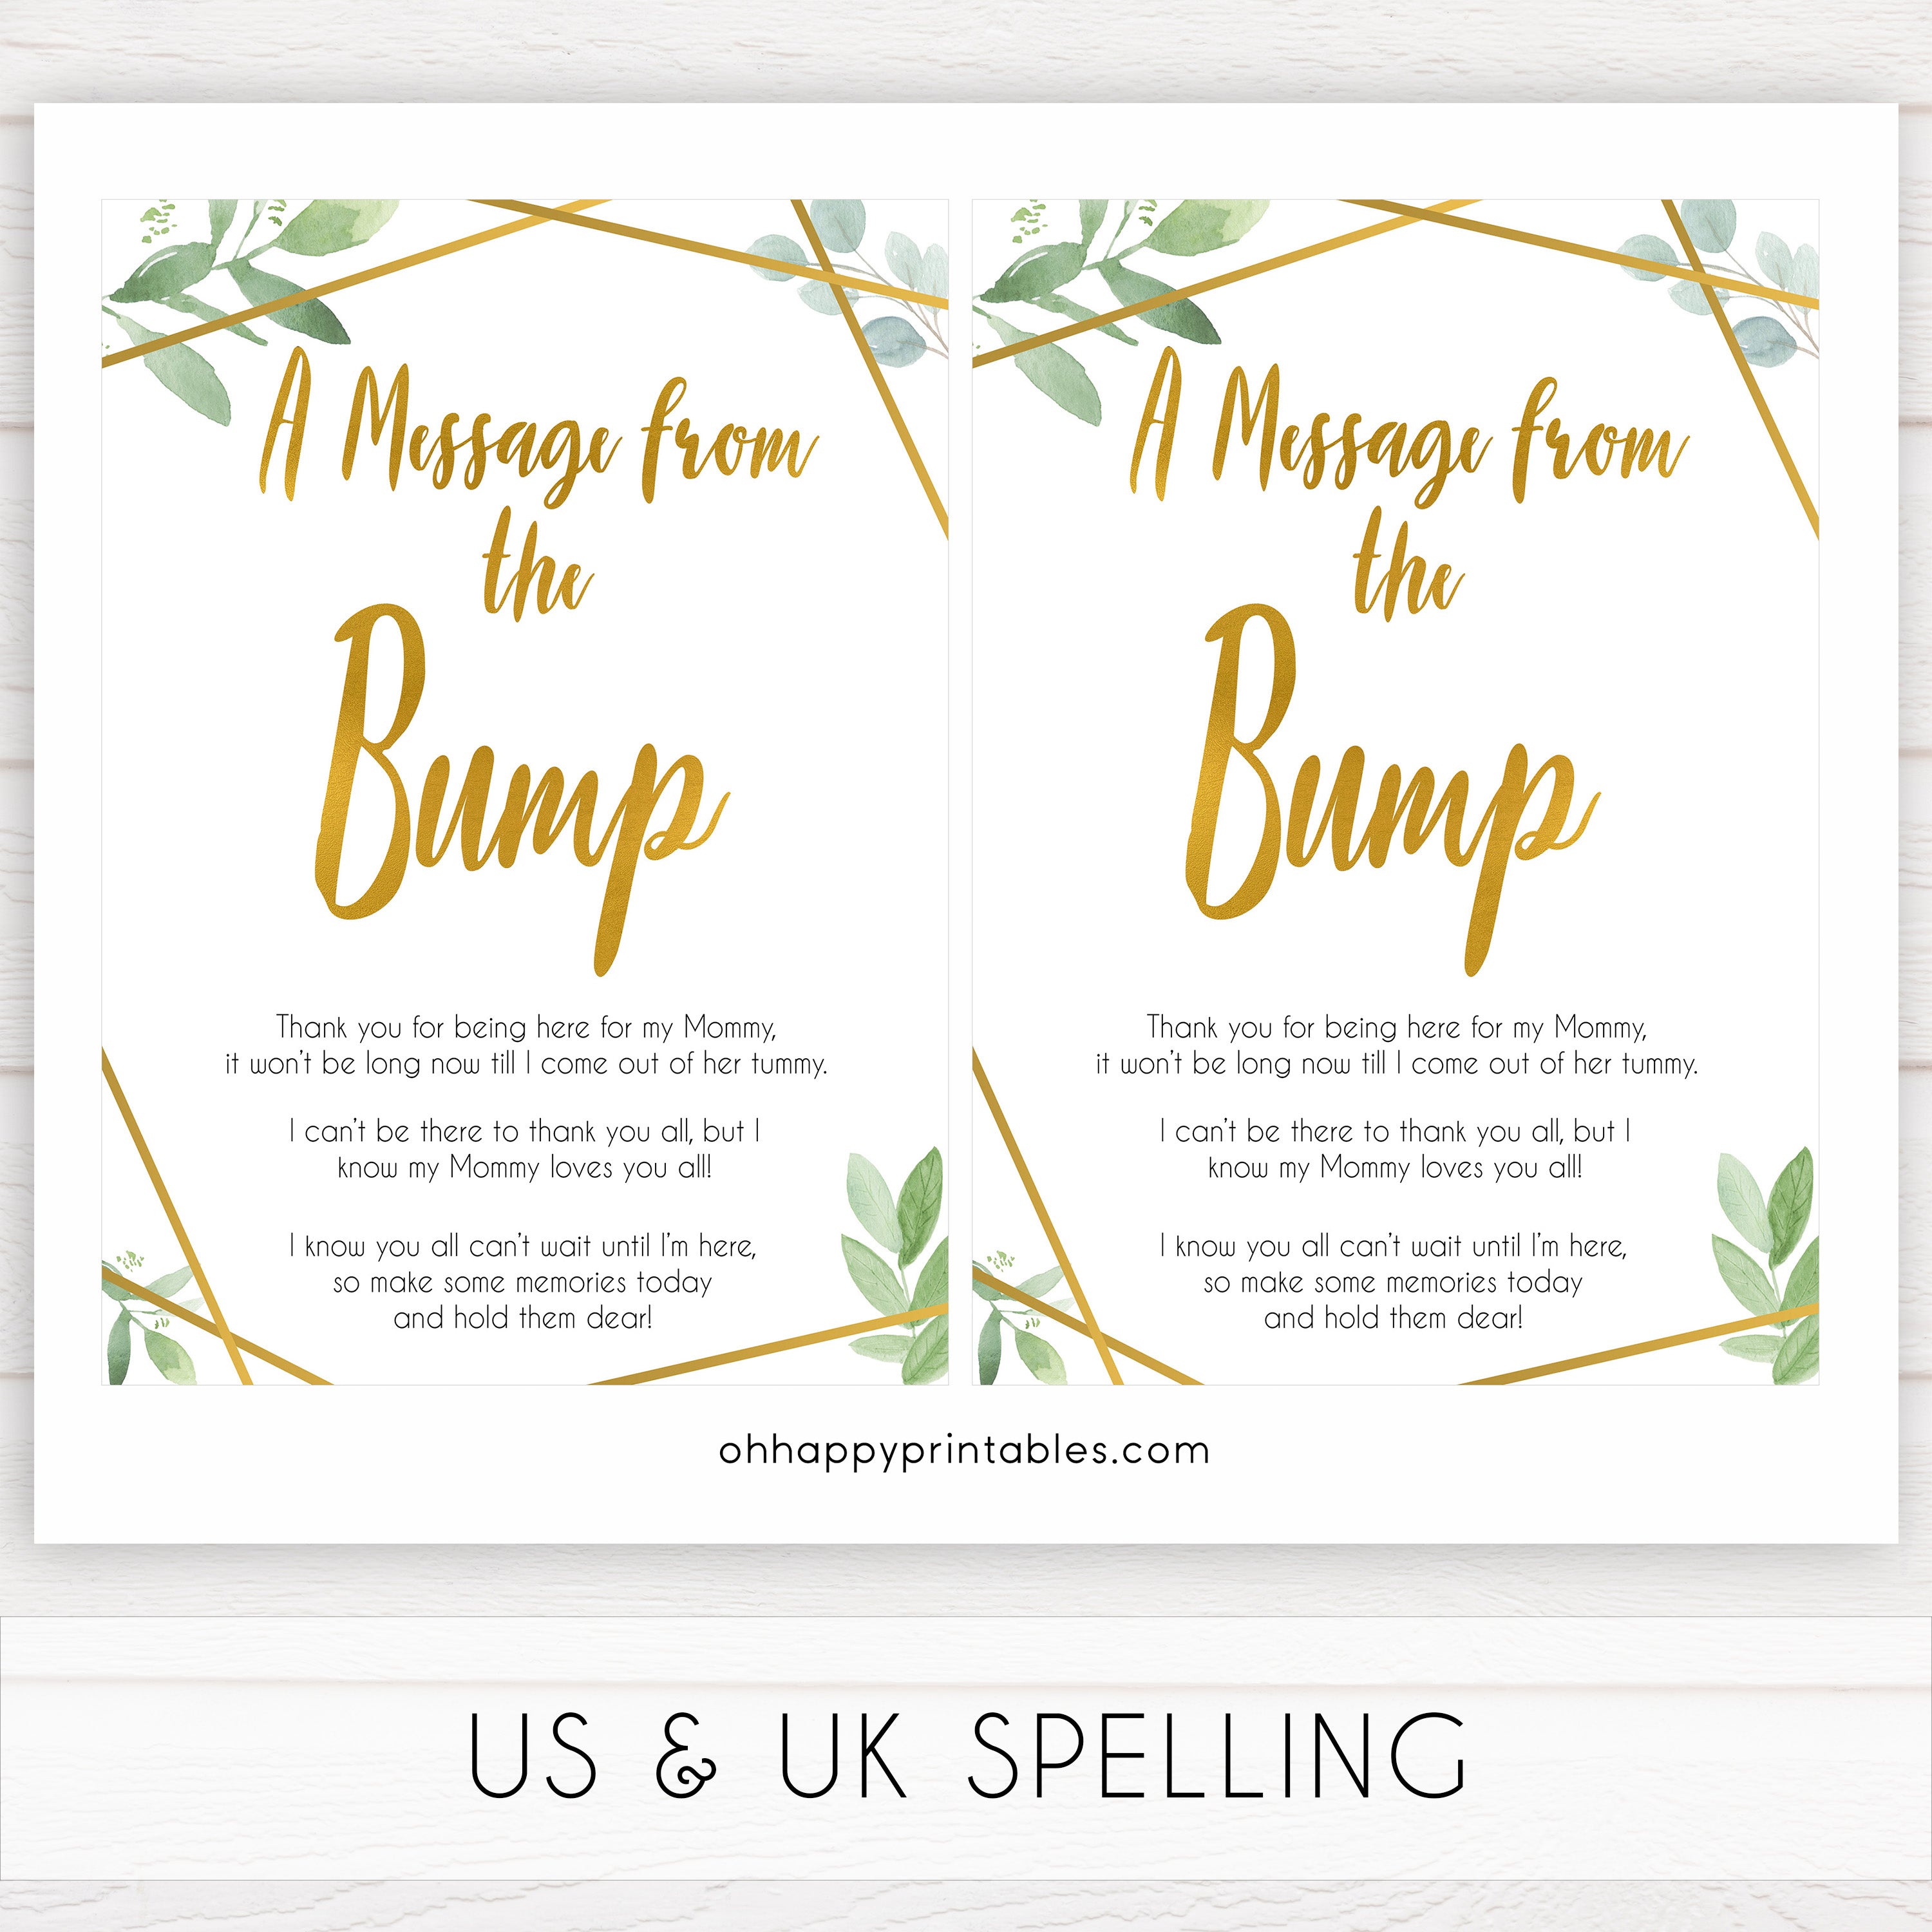 gold geometric message from the bump baby shower games, printable baby shower games, fun baby games, popular baby games, gold baby games